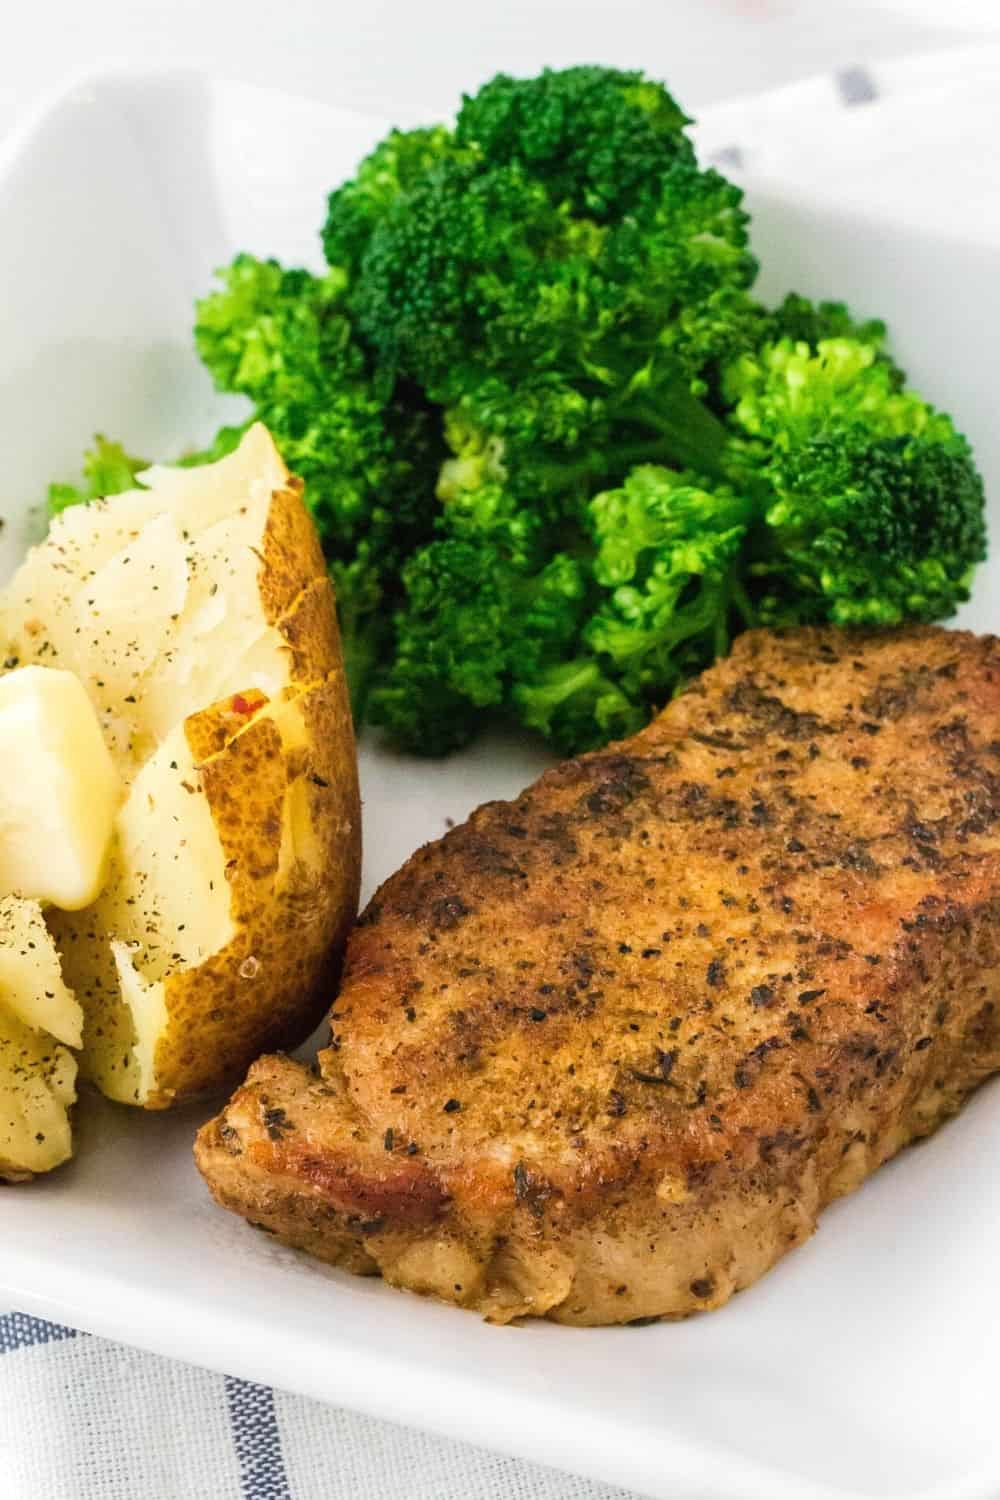 Instant Pot boneless pork chop served with baked potato and broccoli on a white plate